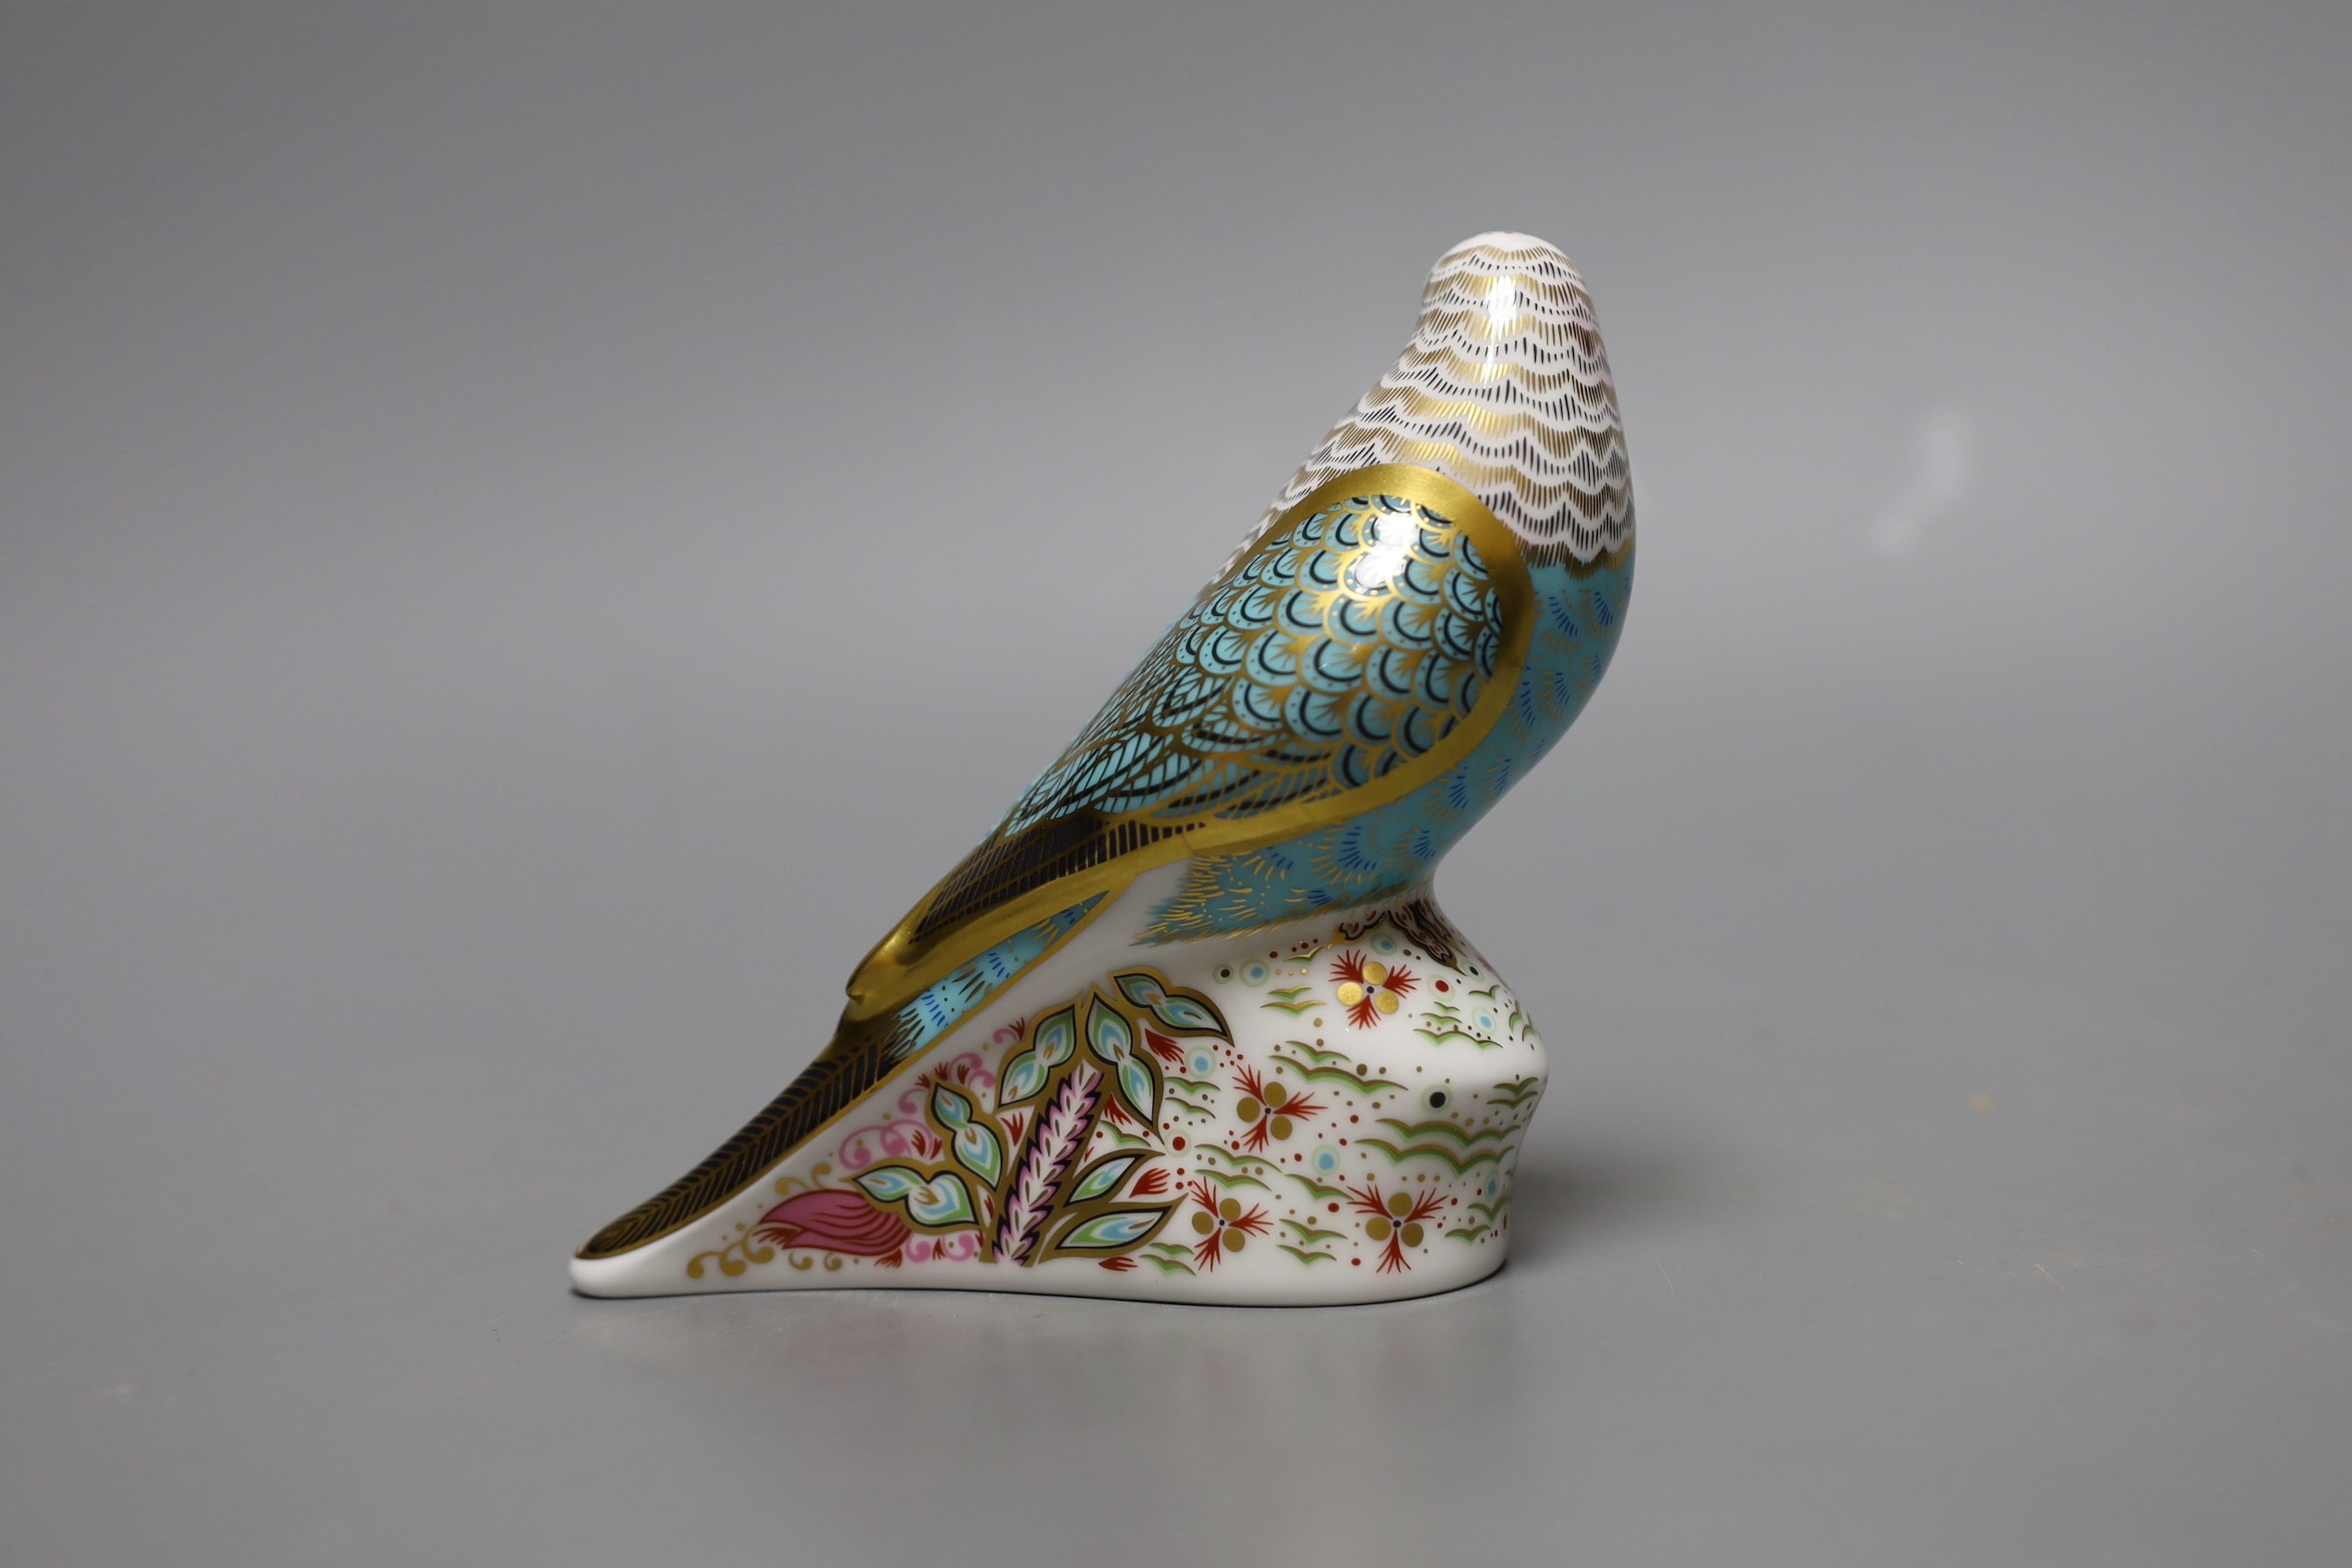 A limited edition Royal Crown Derby paperweight - Sky Blue Budgerigar, gold stopper, boxed with edition card, 647/1000